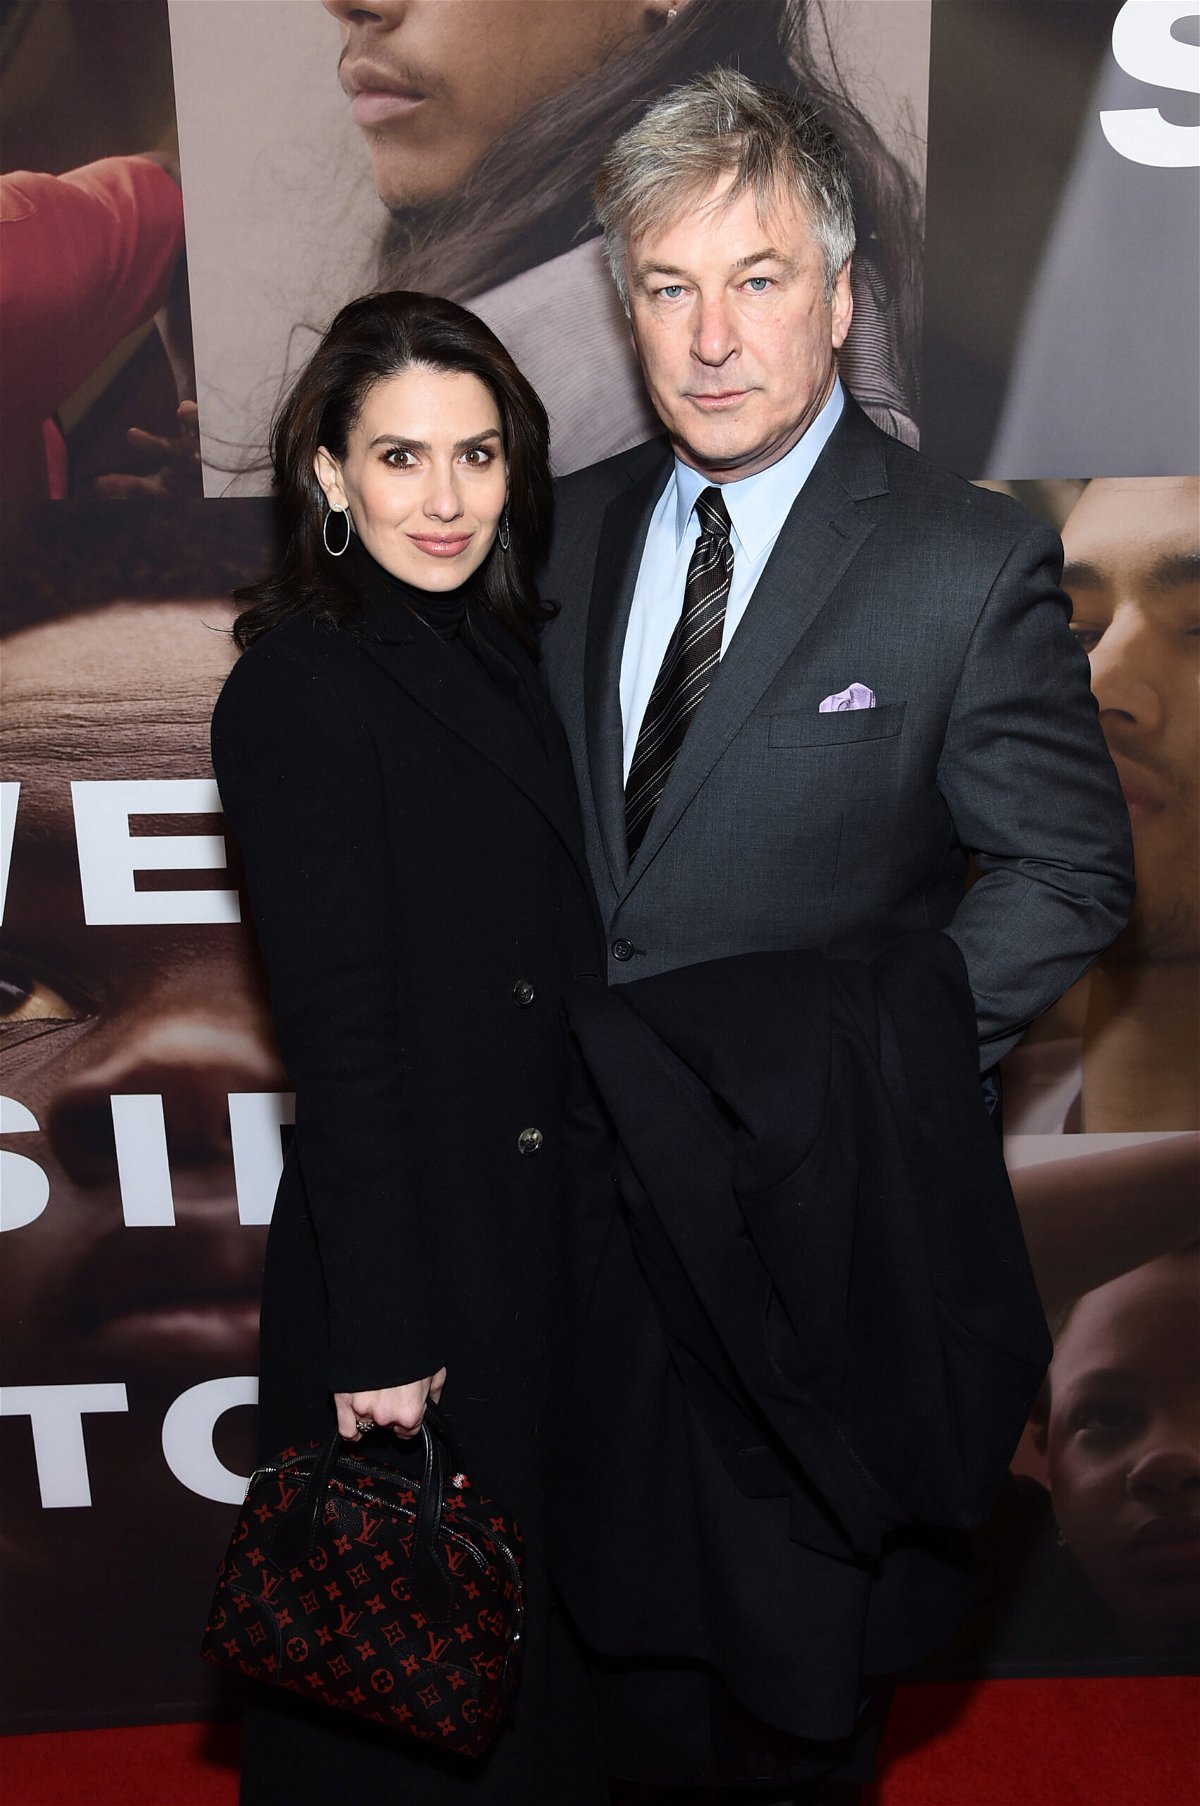 <i>Jamie McCarthy/Getty Images North America</i><br/>Hilaria Baldwin reportedly relocated her husband Alec Baldwin and their kids temporarily to Vermont to support his mental health. The couple is shown here at the opening night of 